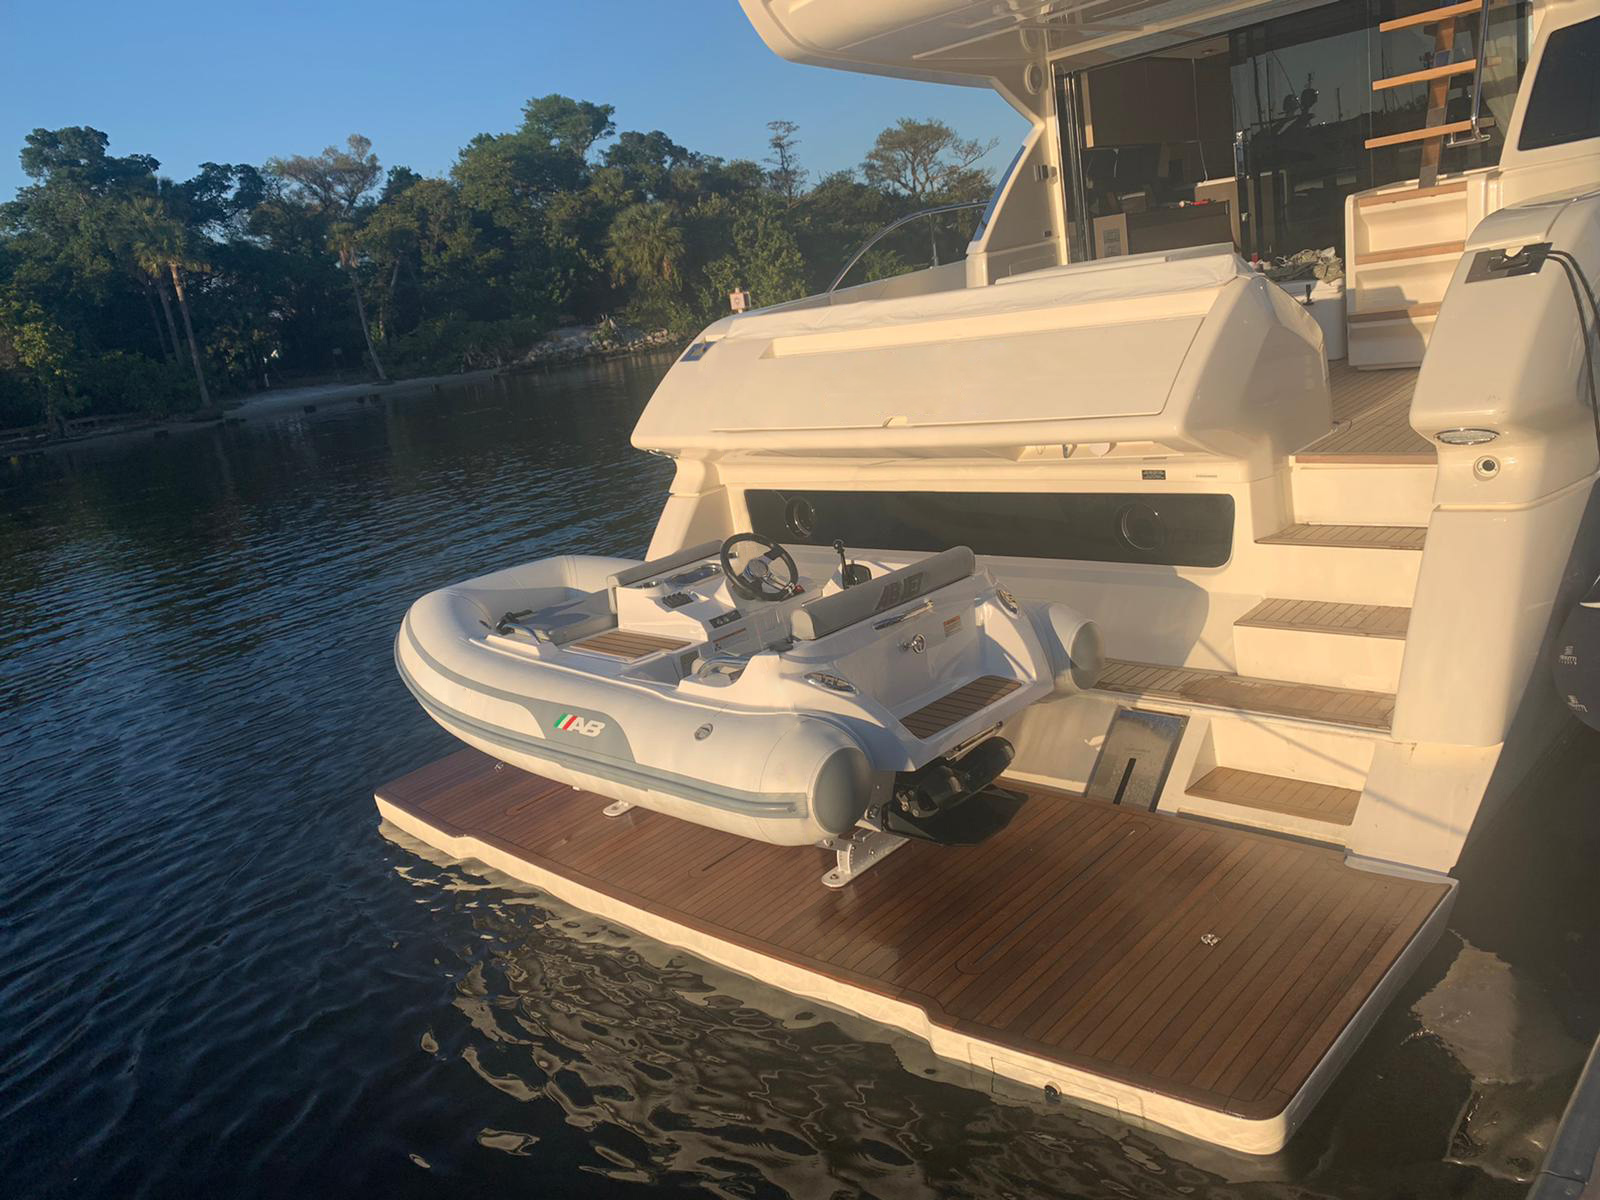 AB Inflatable yacht tender